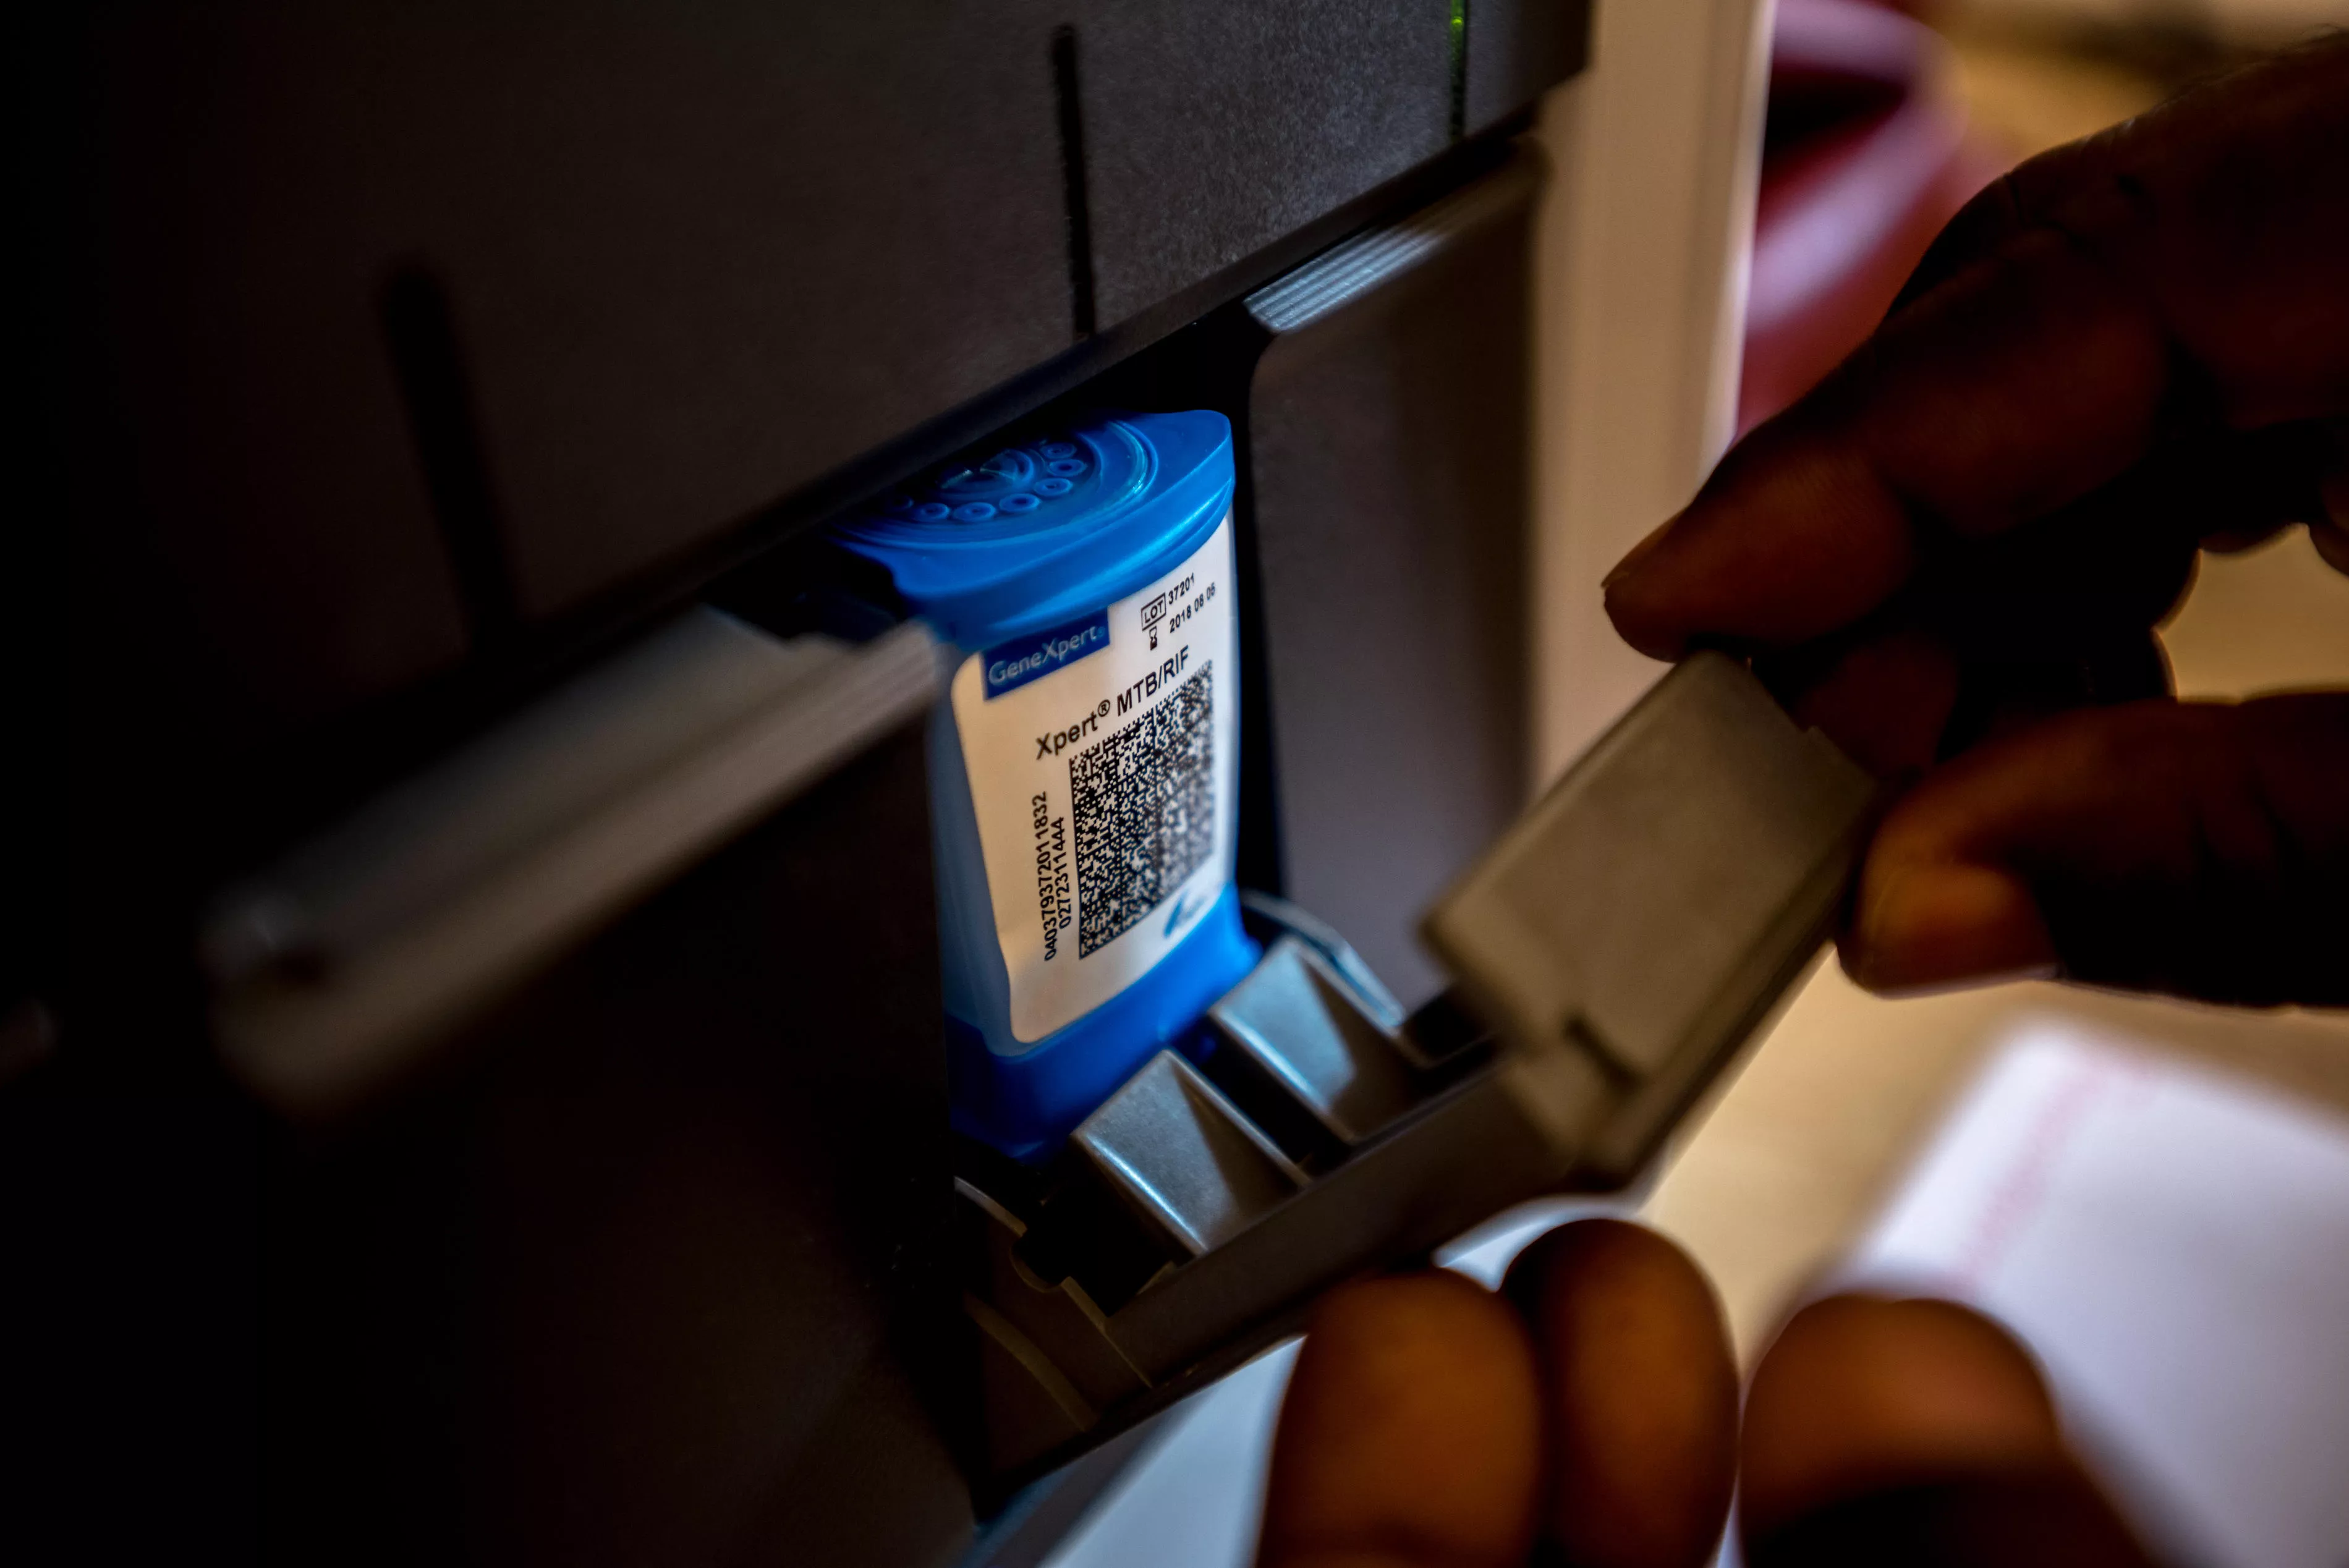 GeneXpert test cartridge being used to test a sample of suspected TB in MSF’s lab at Bangassou Hospital, Central African Republic, 2017.